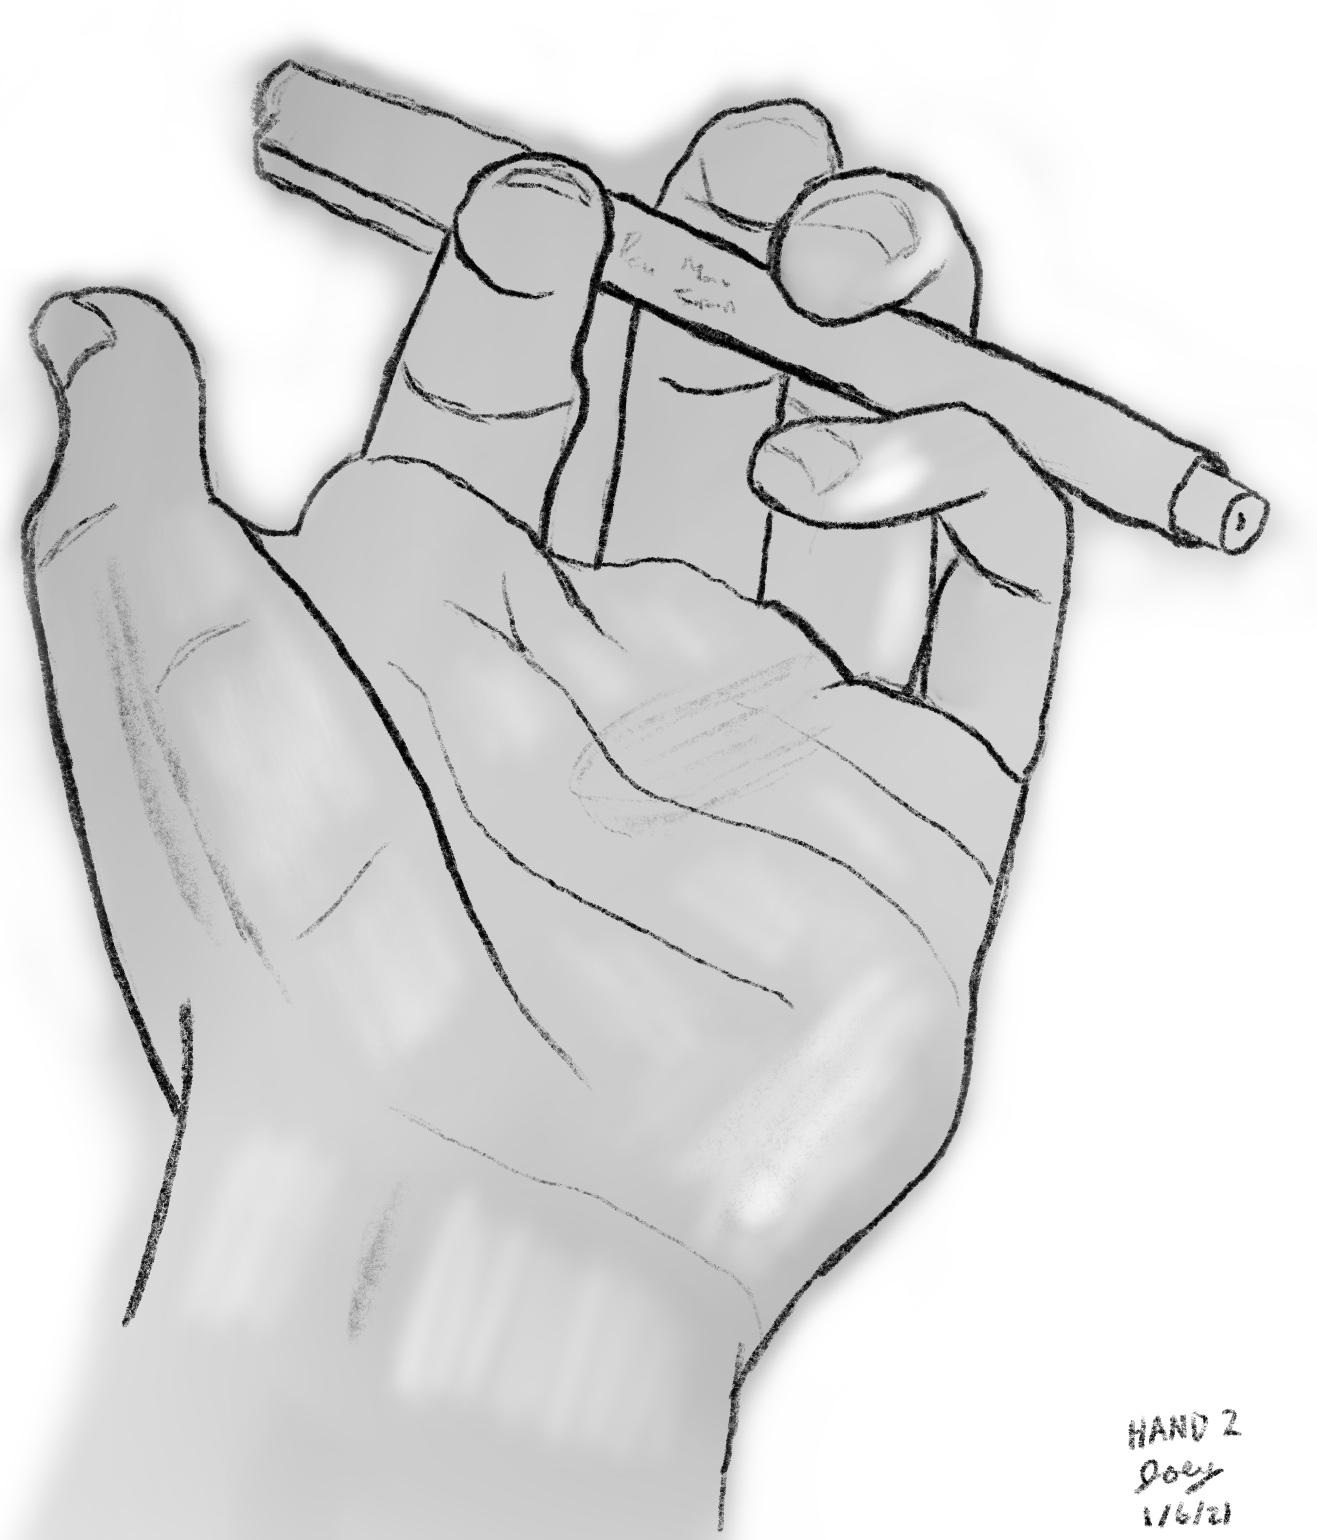 A drawing of the palm of a left hand, fingers pointing towards the viewer. The fingers are holding a pen.